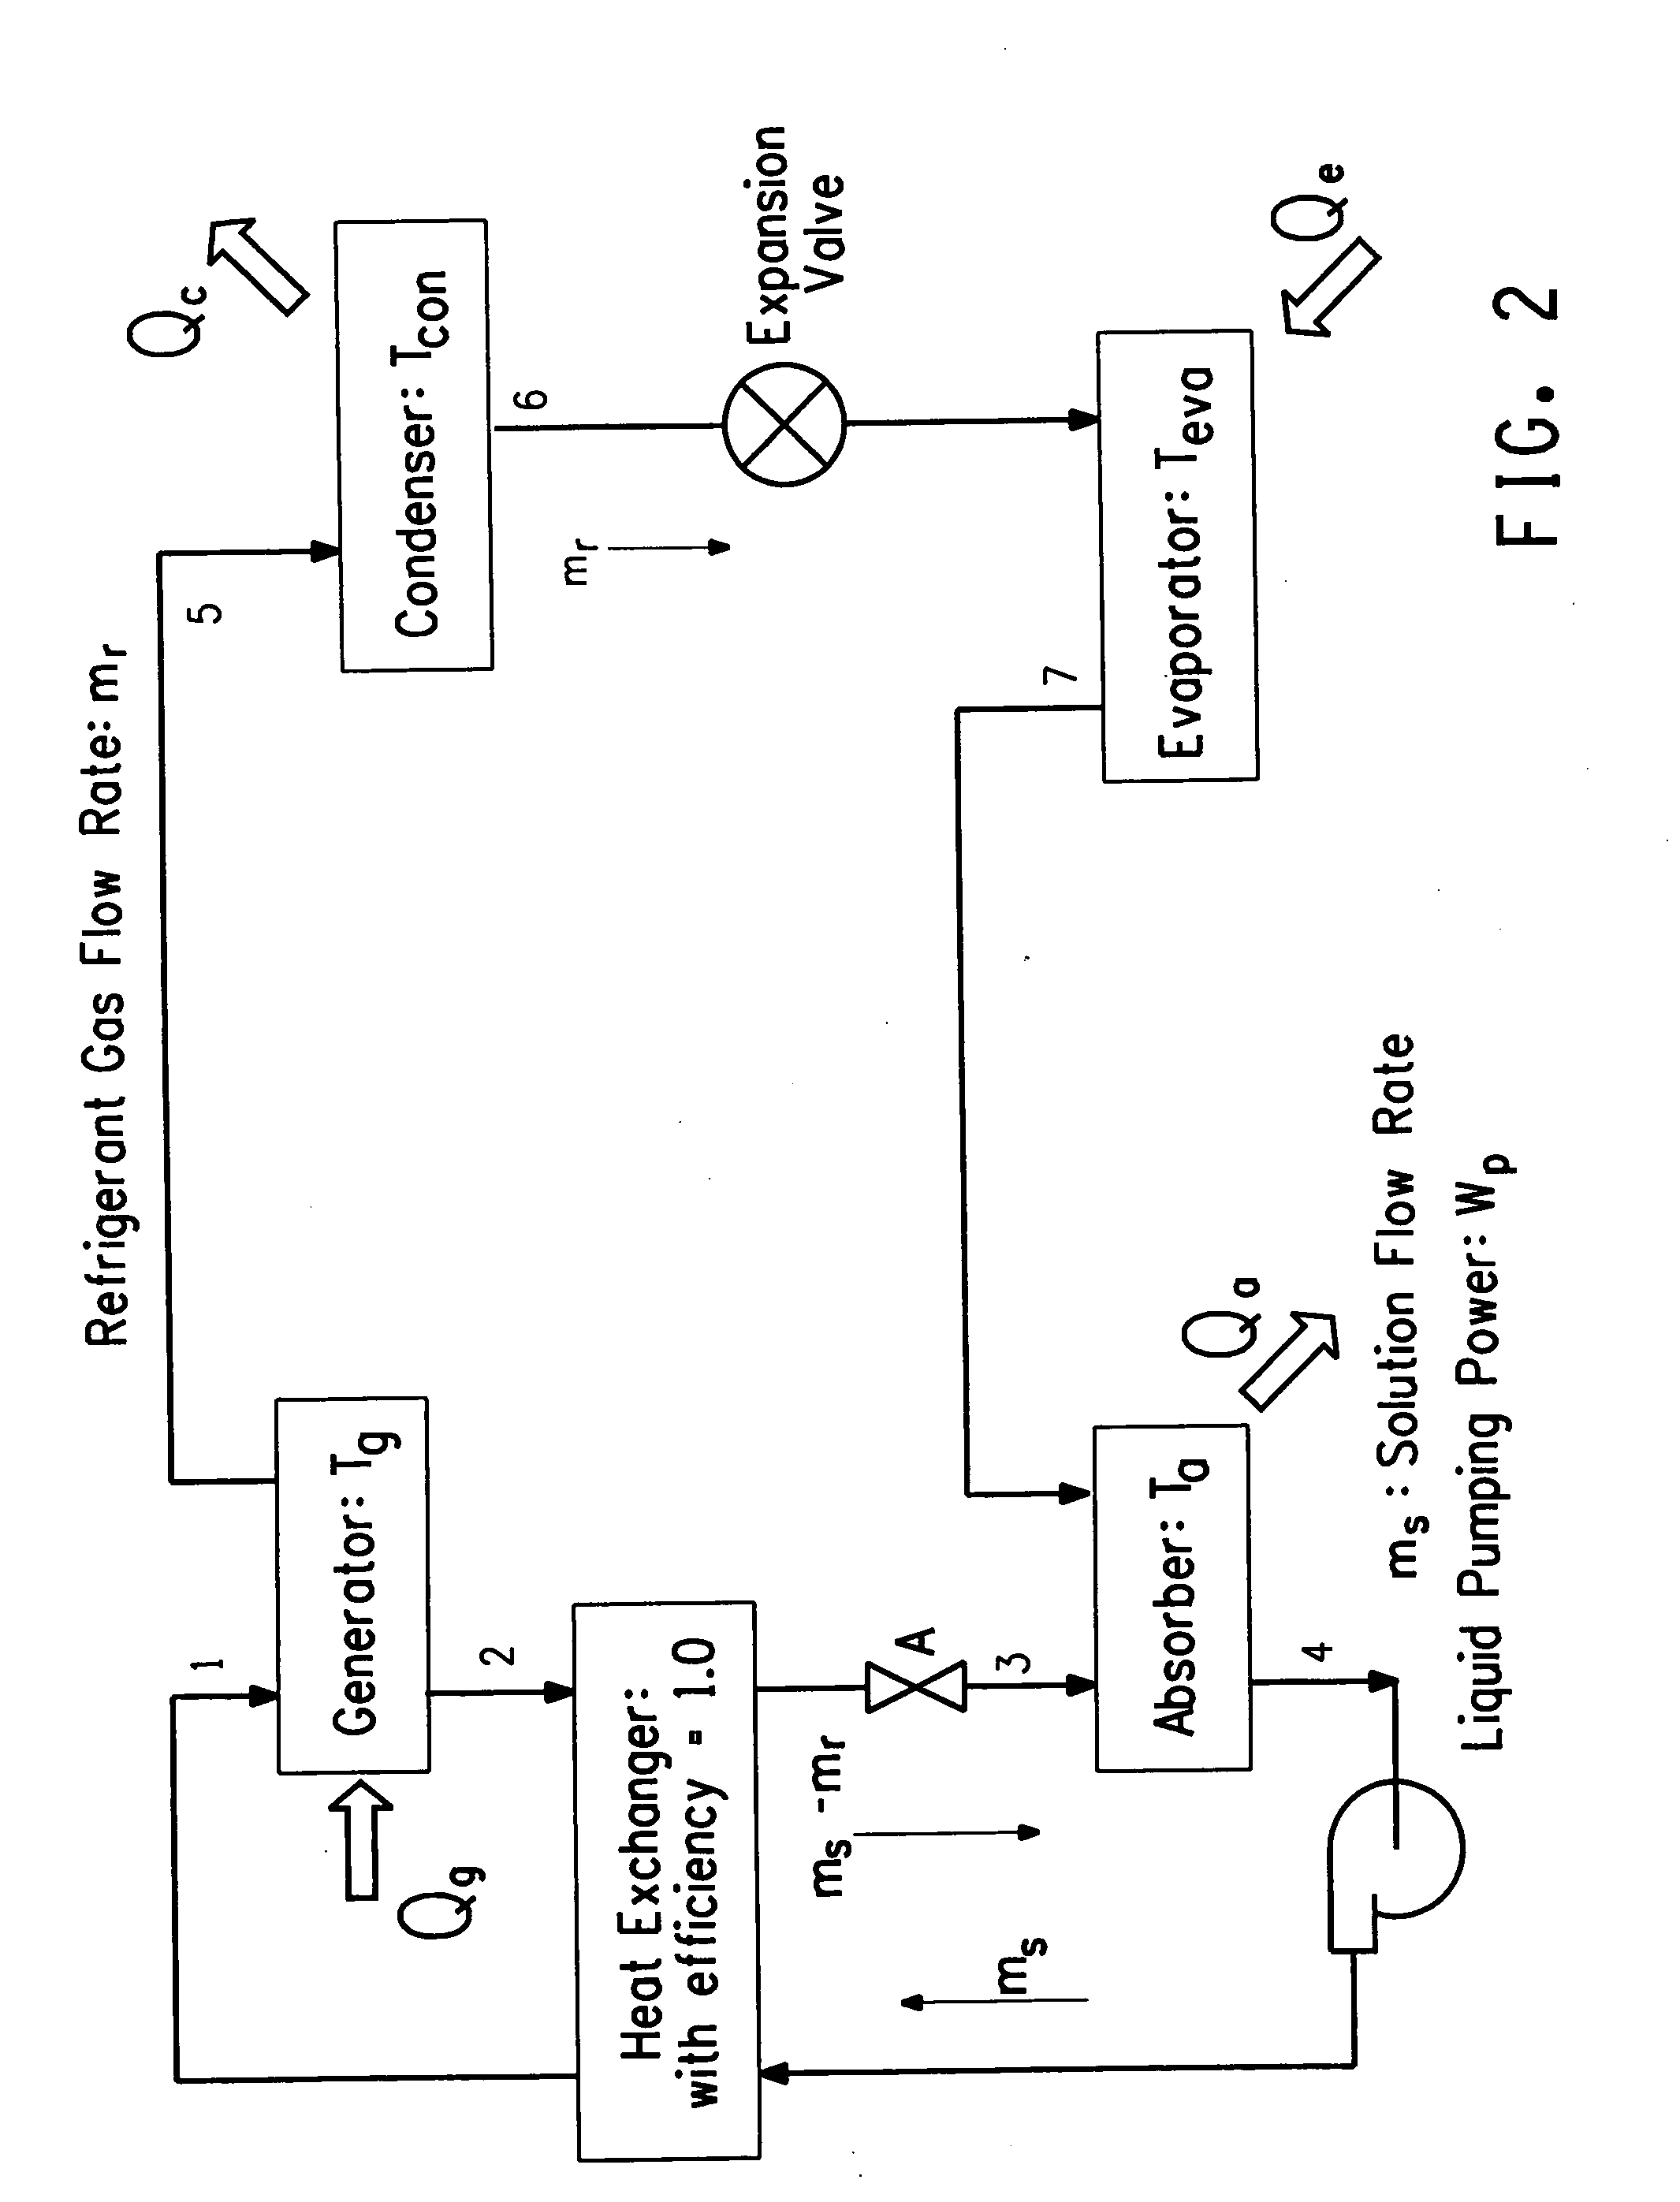 Hybrid vapor compression-absorption cycle